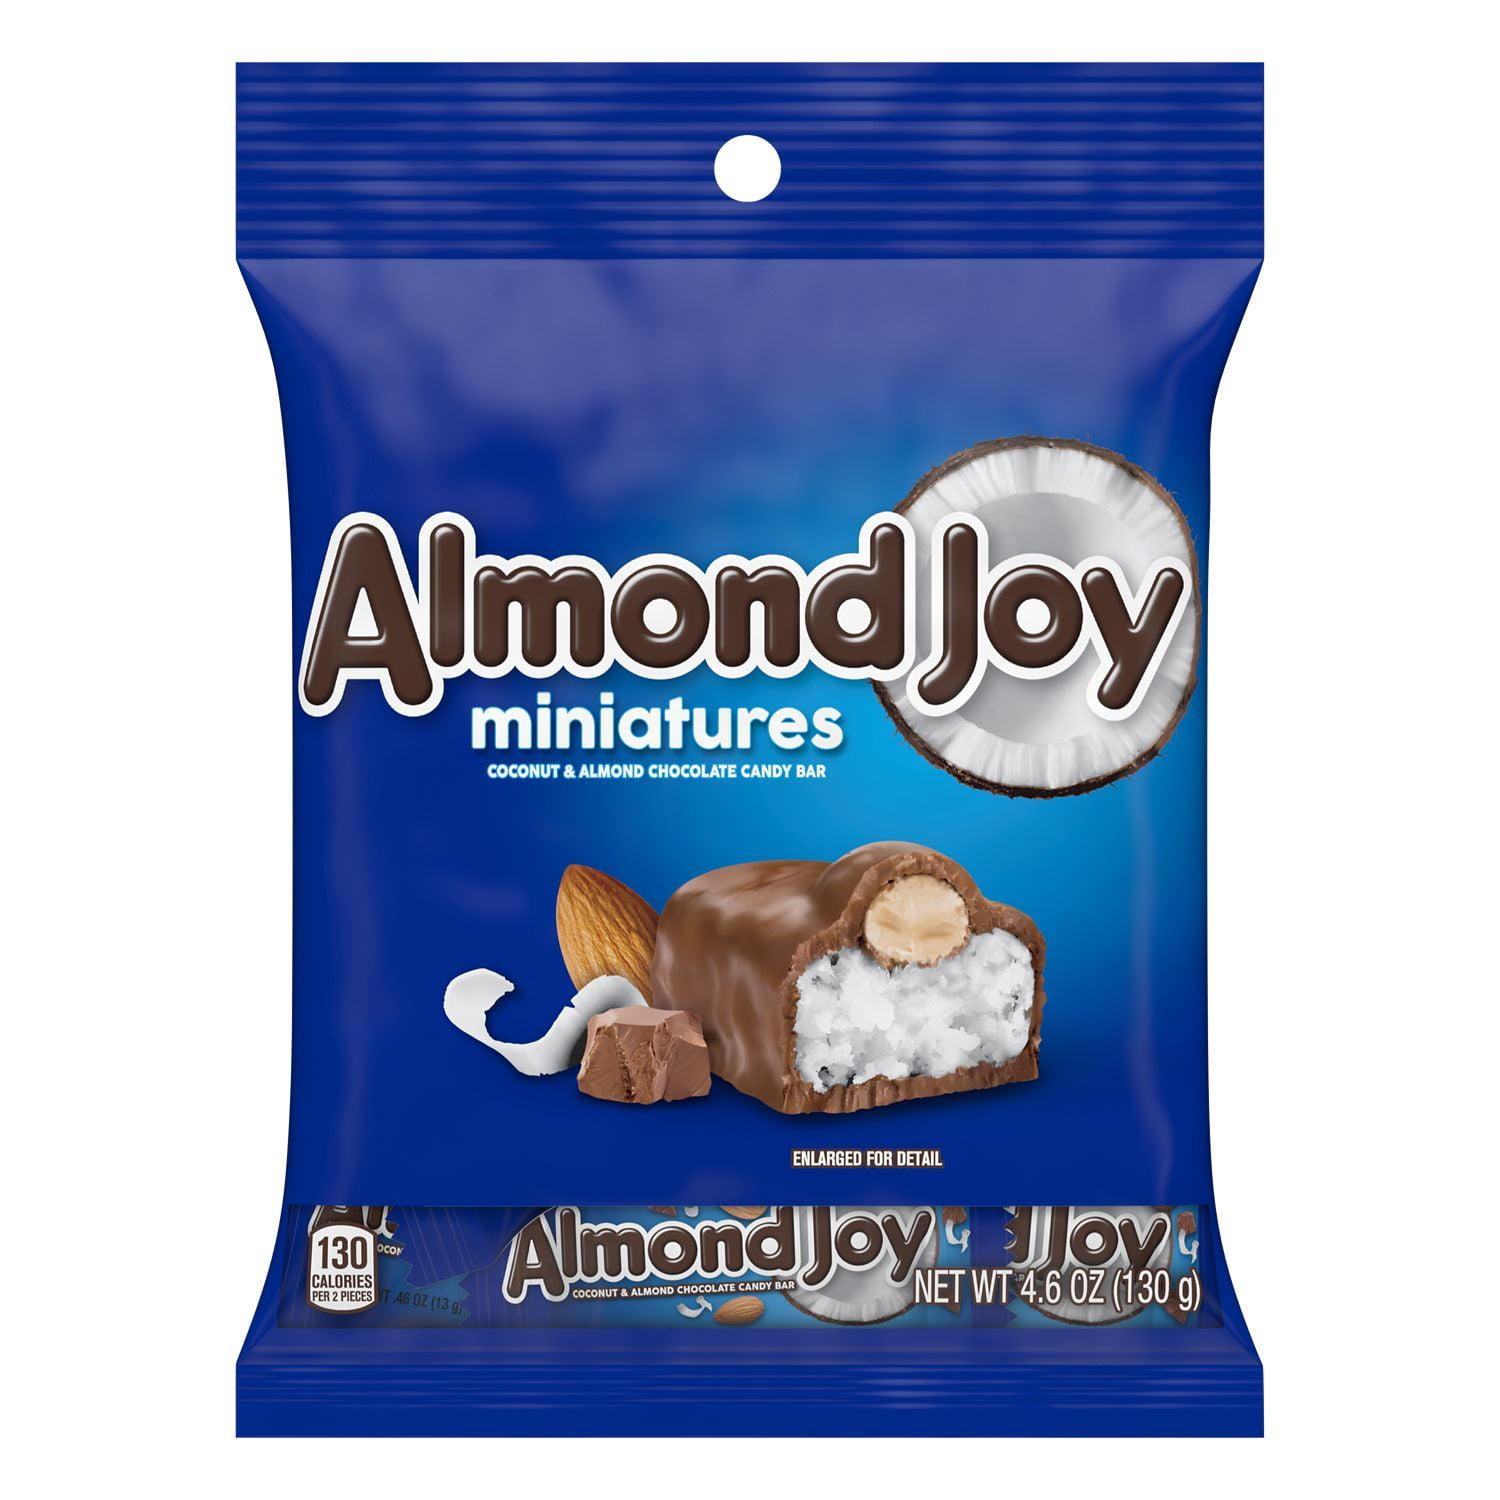 ALMOND JOY, Miniatures Coconut and Almond Chocolate Candy Bars, Gluten Free, Individually Wrapped, 4.6 oz, Bag